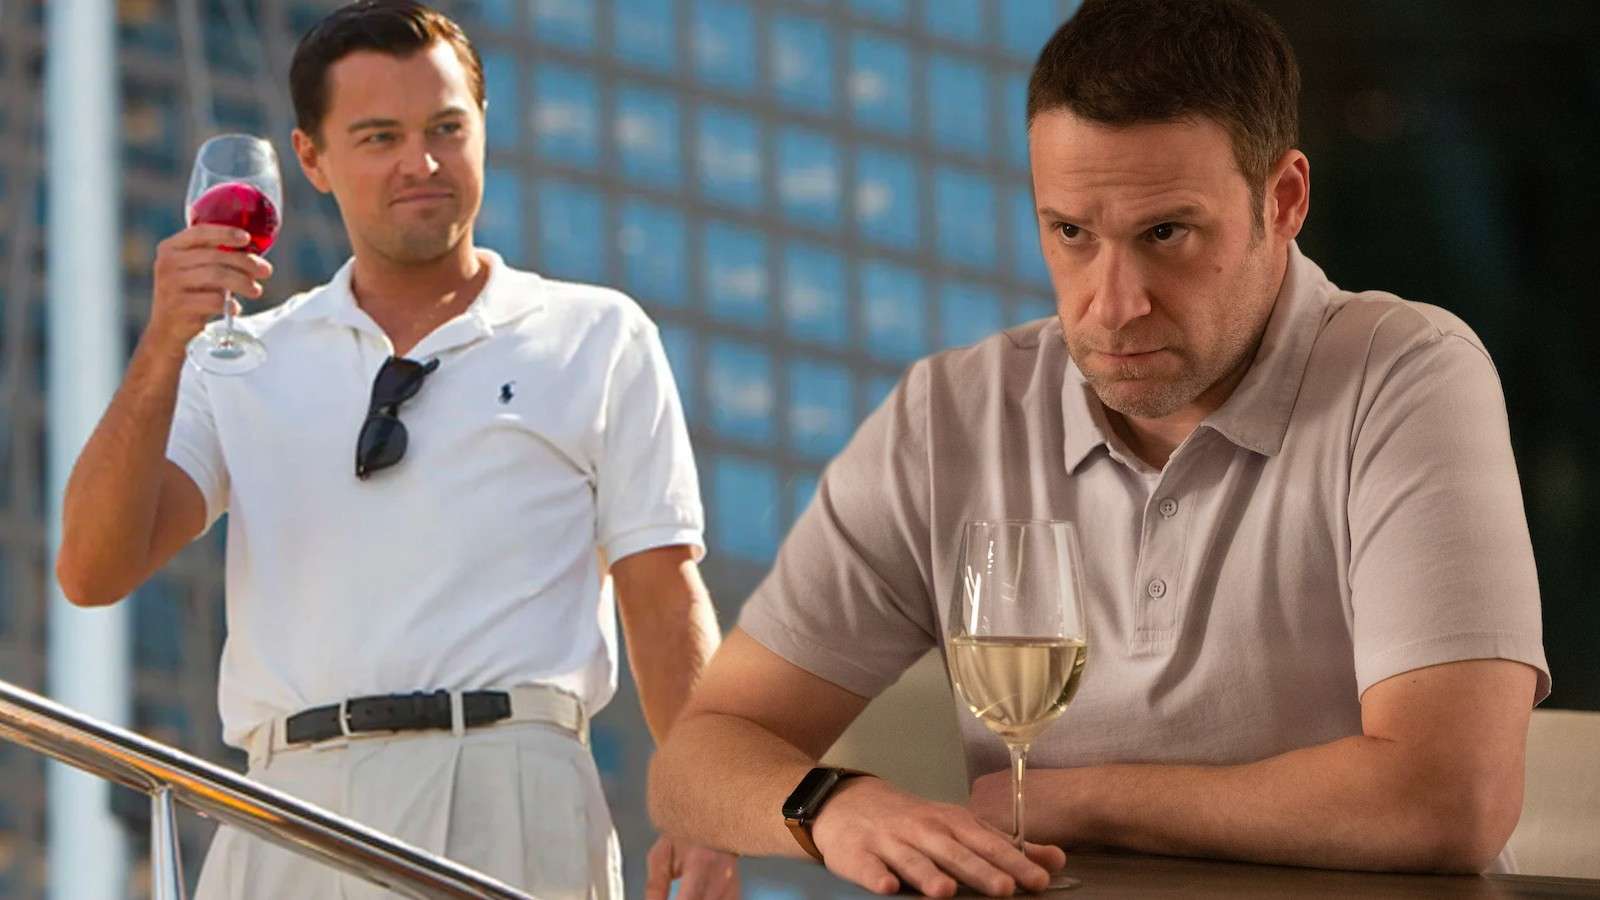 Leonardo DiCaprio in The Wolf of Wall Street and Seth Rogen in Dumb Money